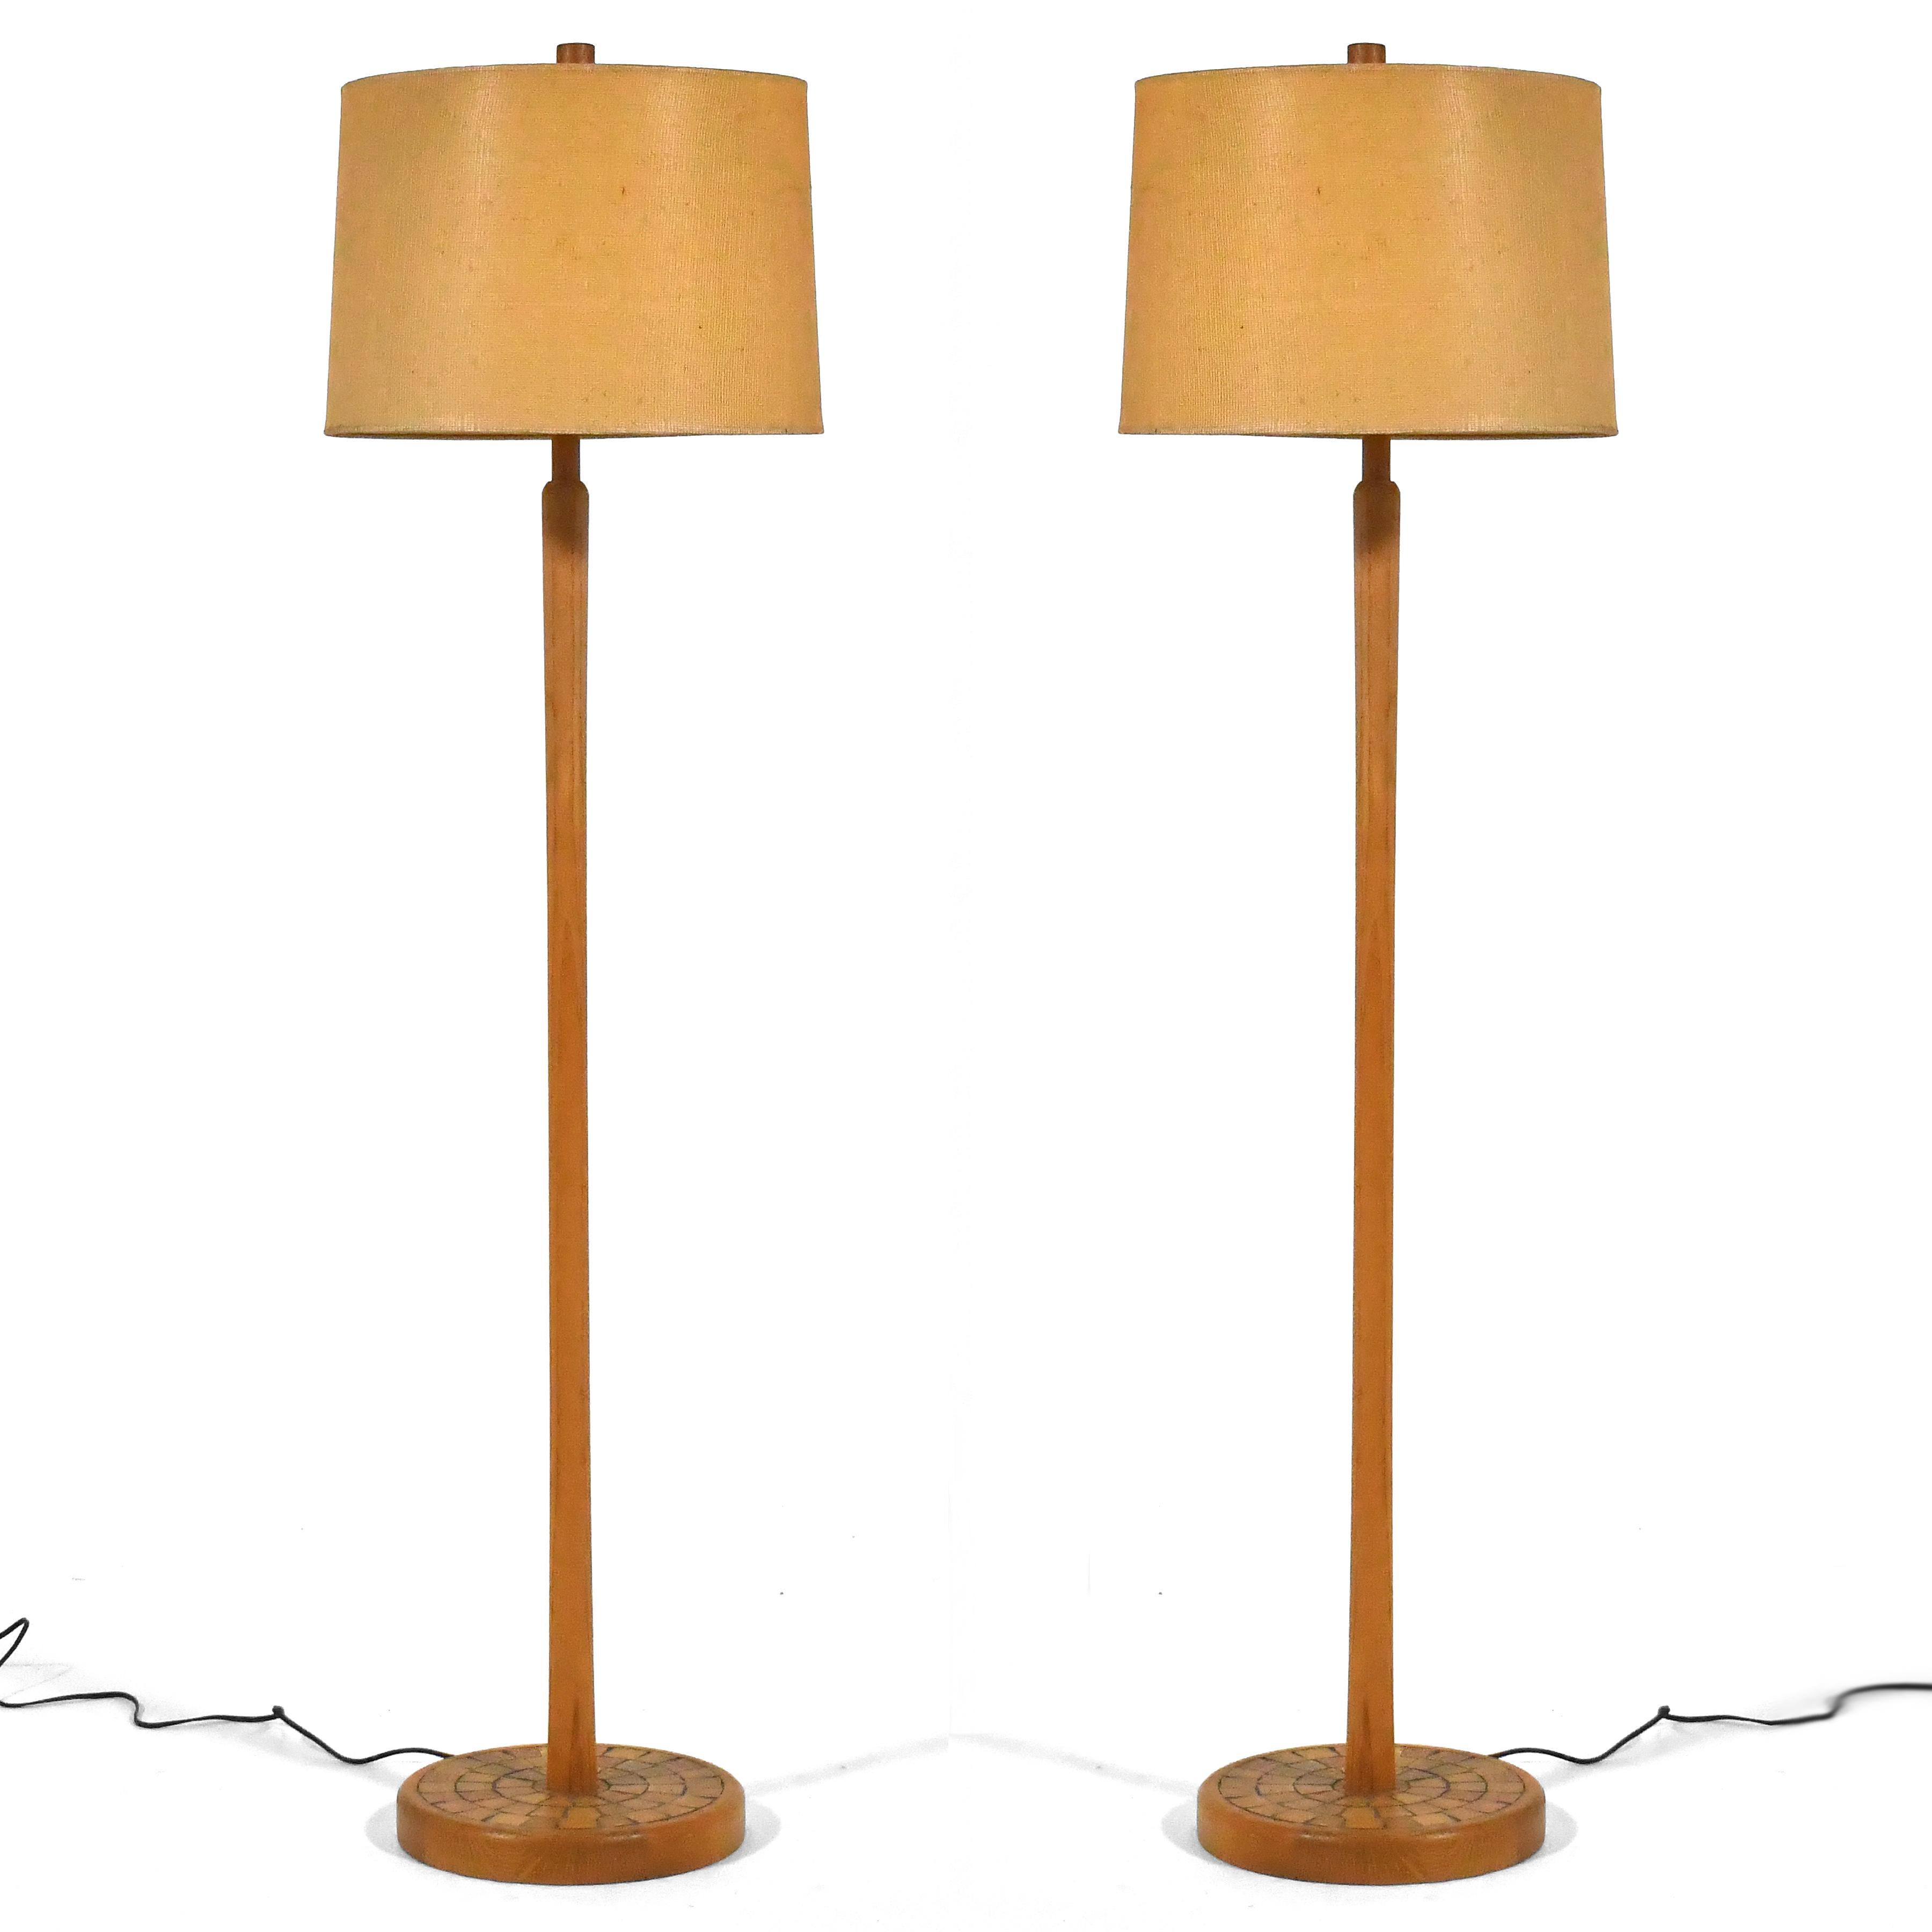 Gordon and Jane Martz are famous for their work in ceramic. Lamps, tables, bowls, decorative accessories and artwork all received their special touch in the kiln. However their sensitive aesthetic extended beyond pottery. These floor lamps are a